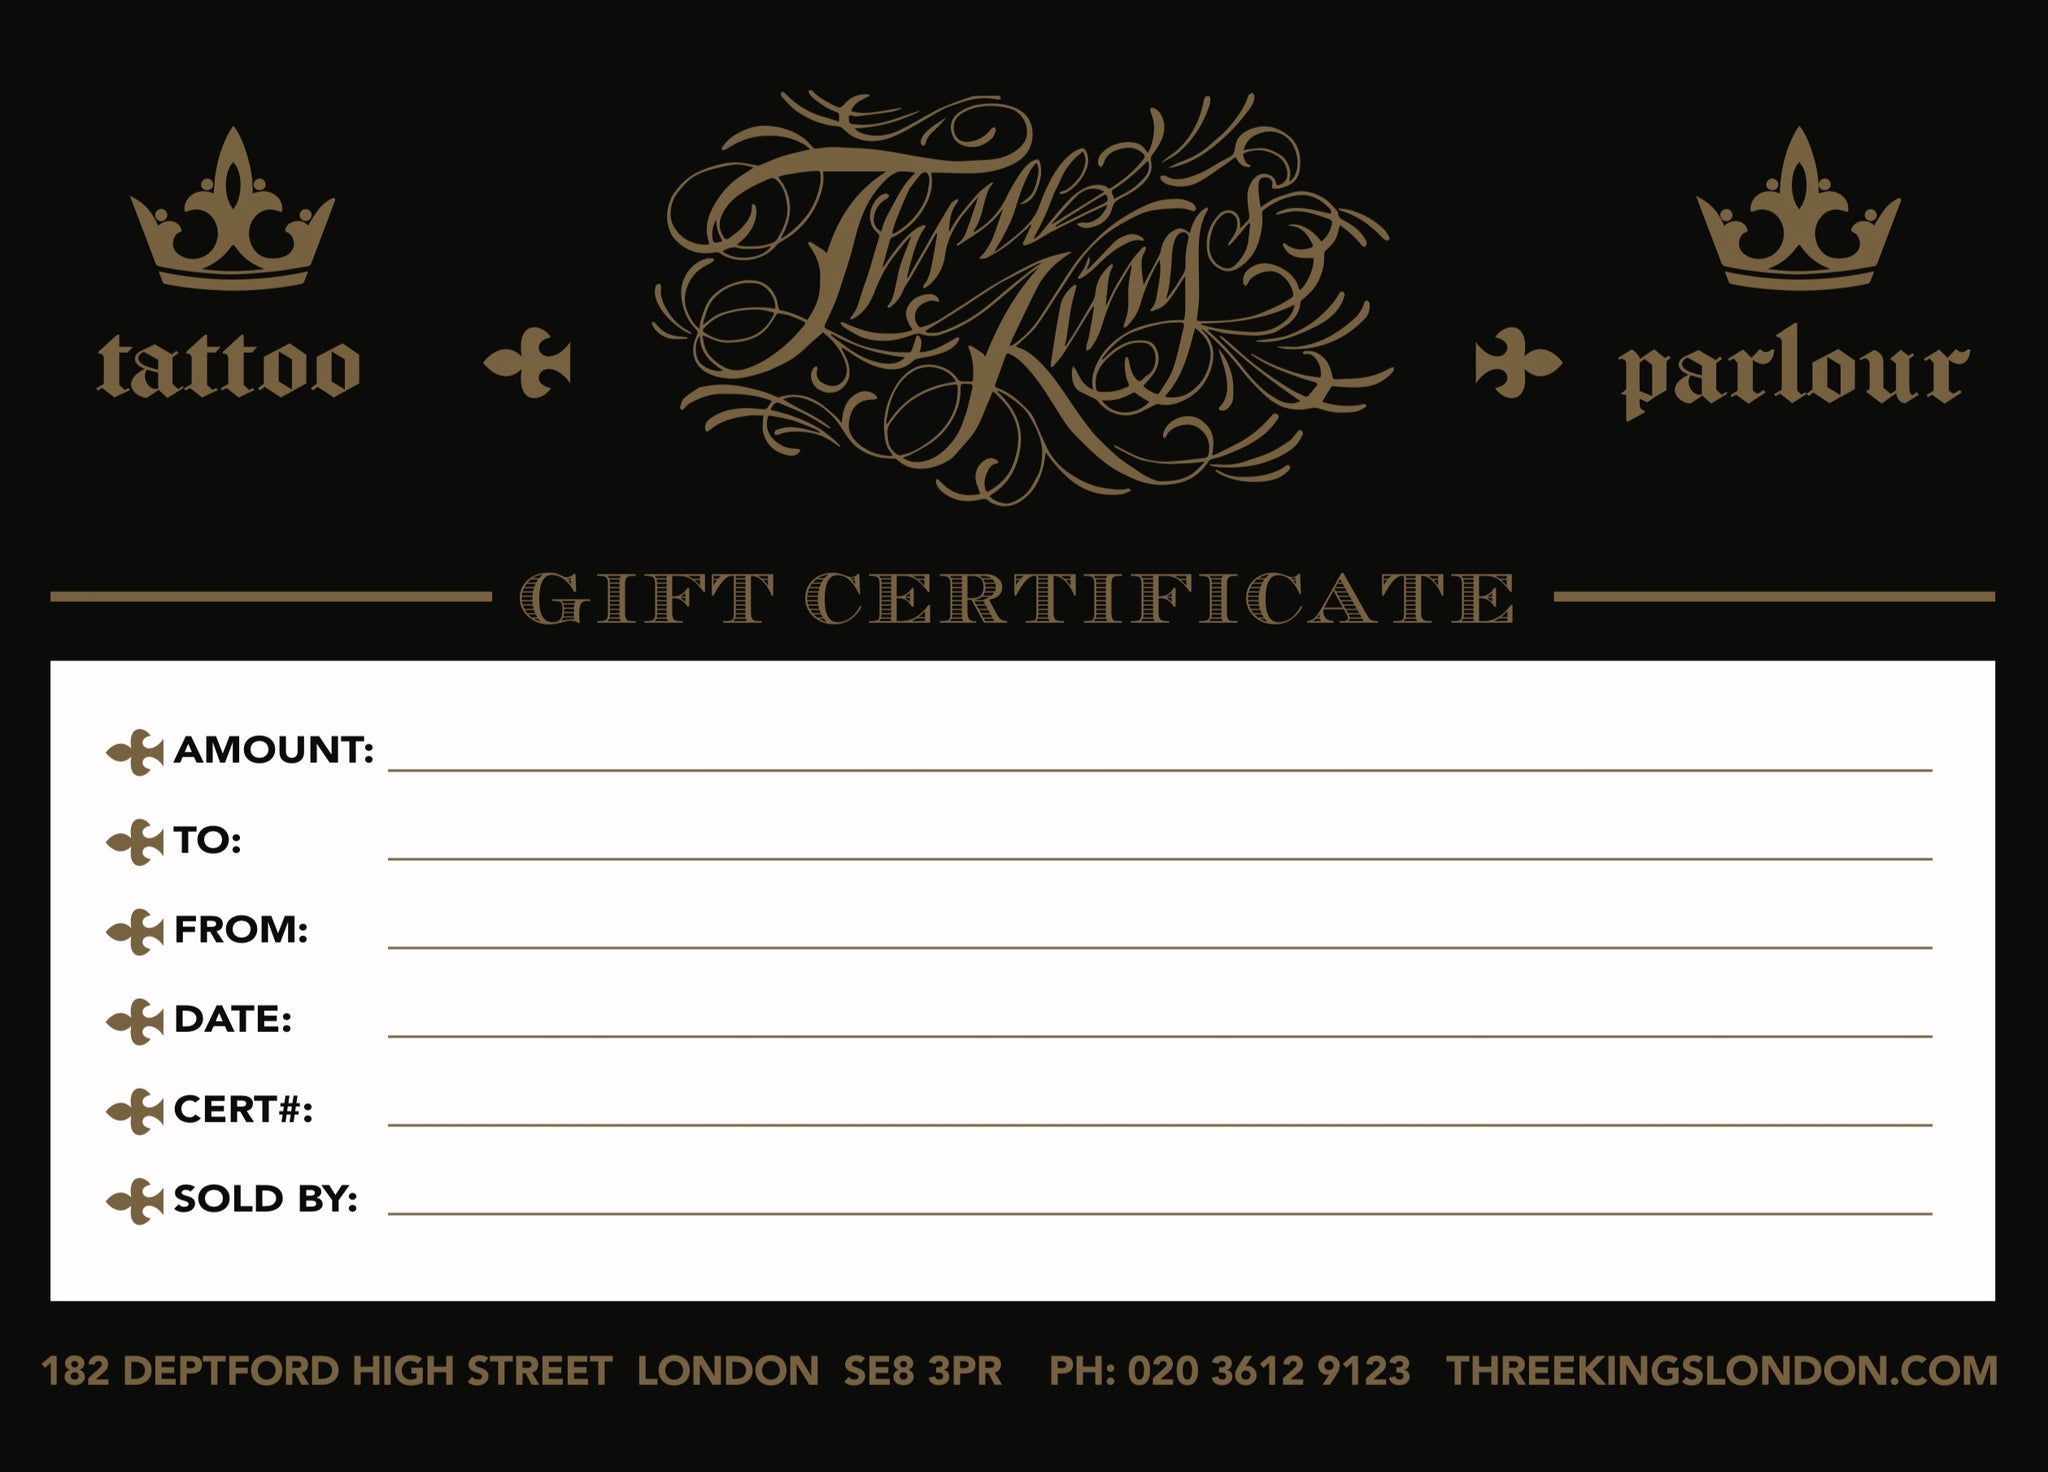 Victorian style gift certificates by Laura Crane on Dribbble